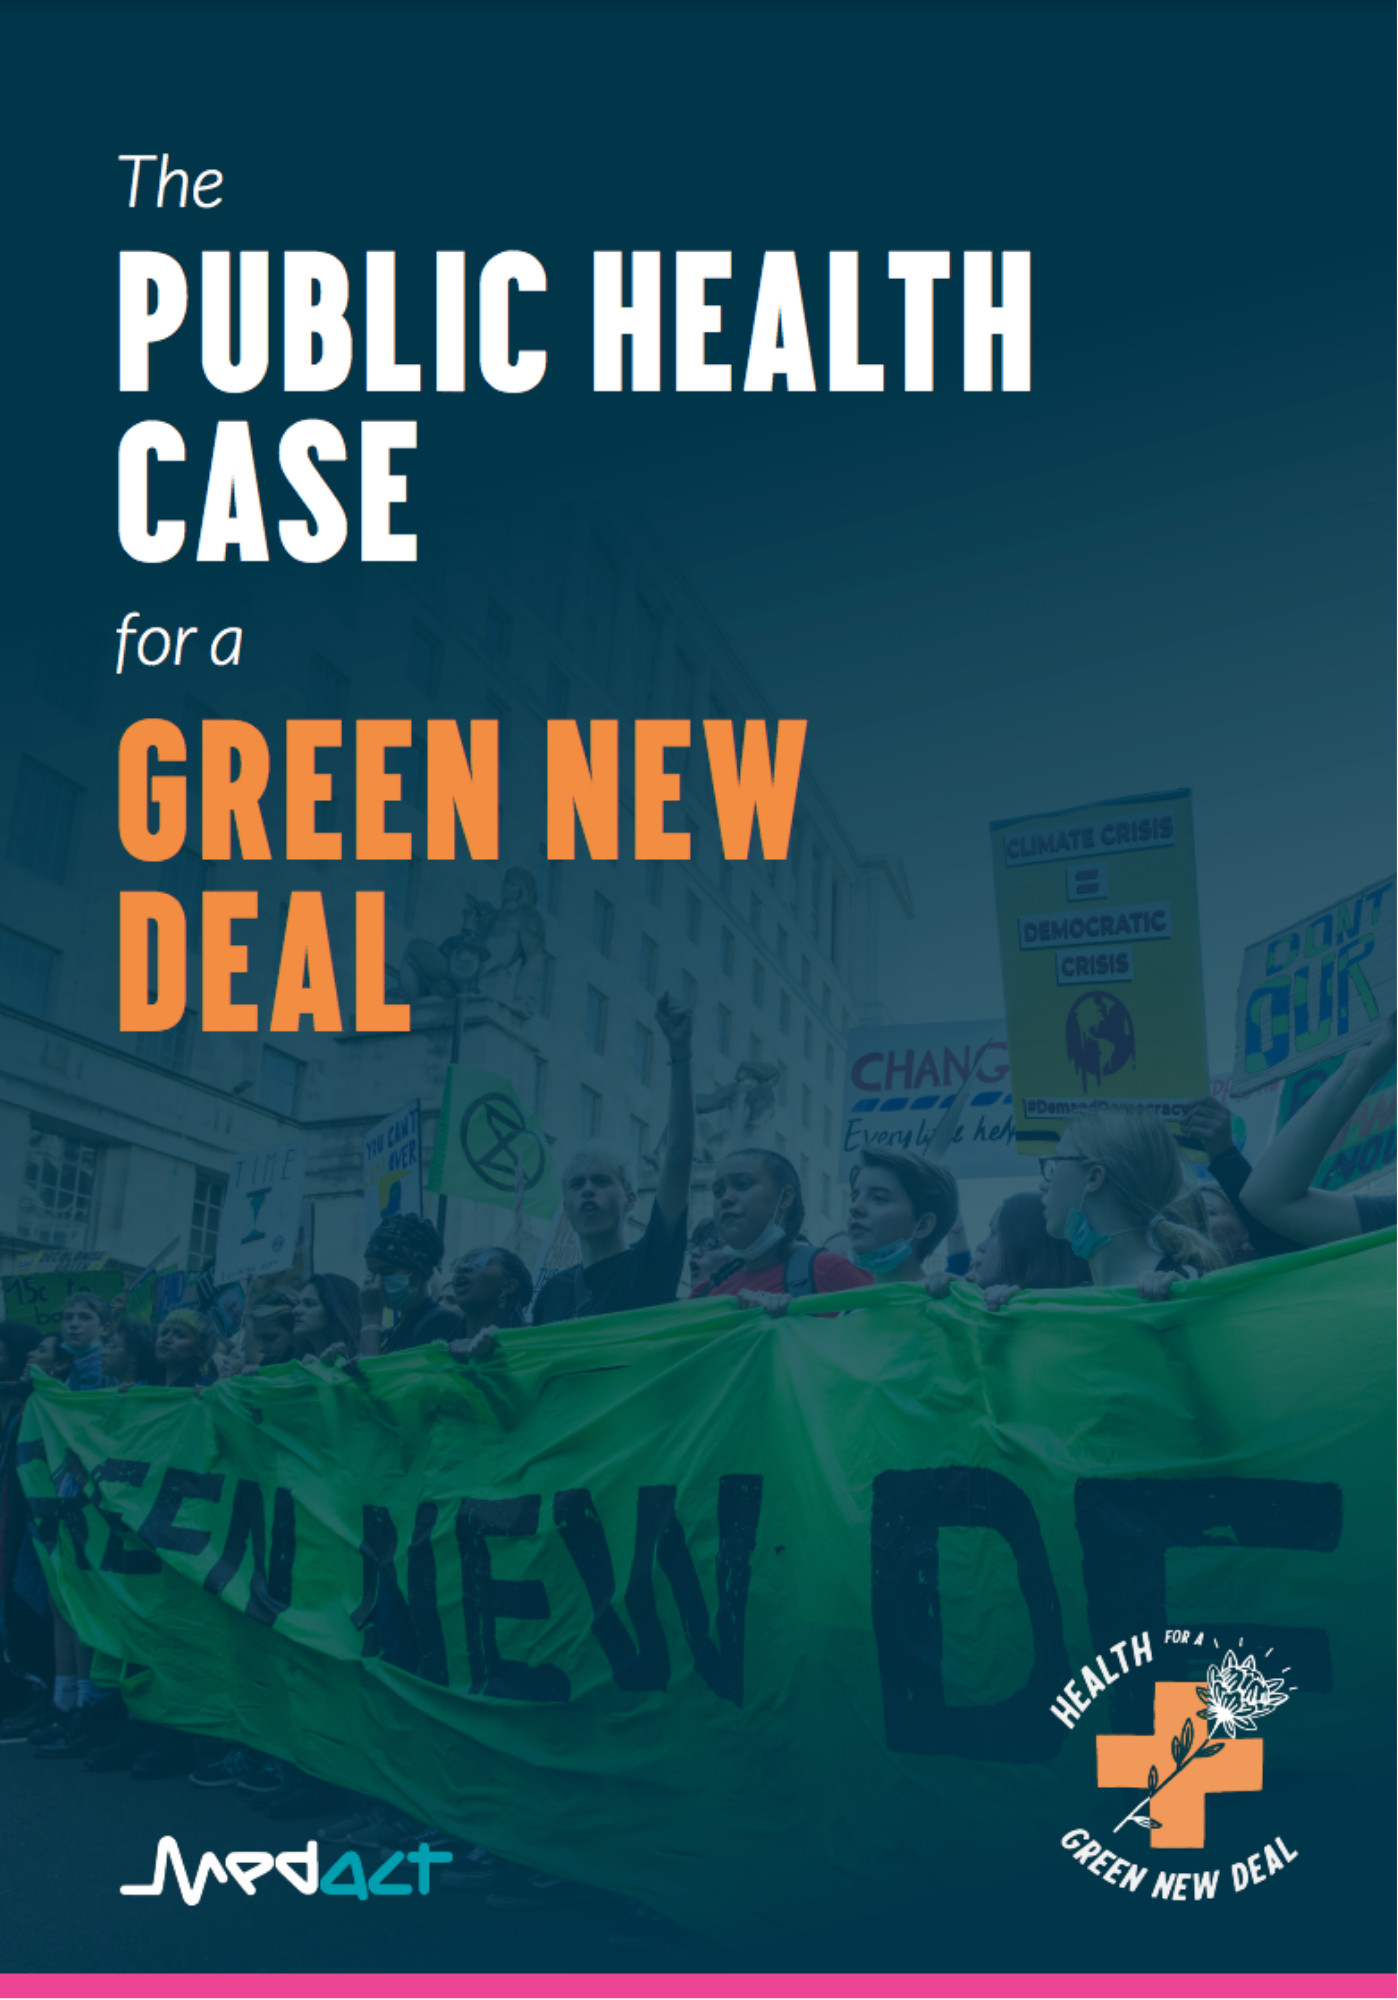 The public health case for a Green New Deal